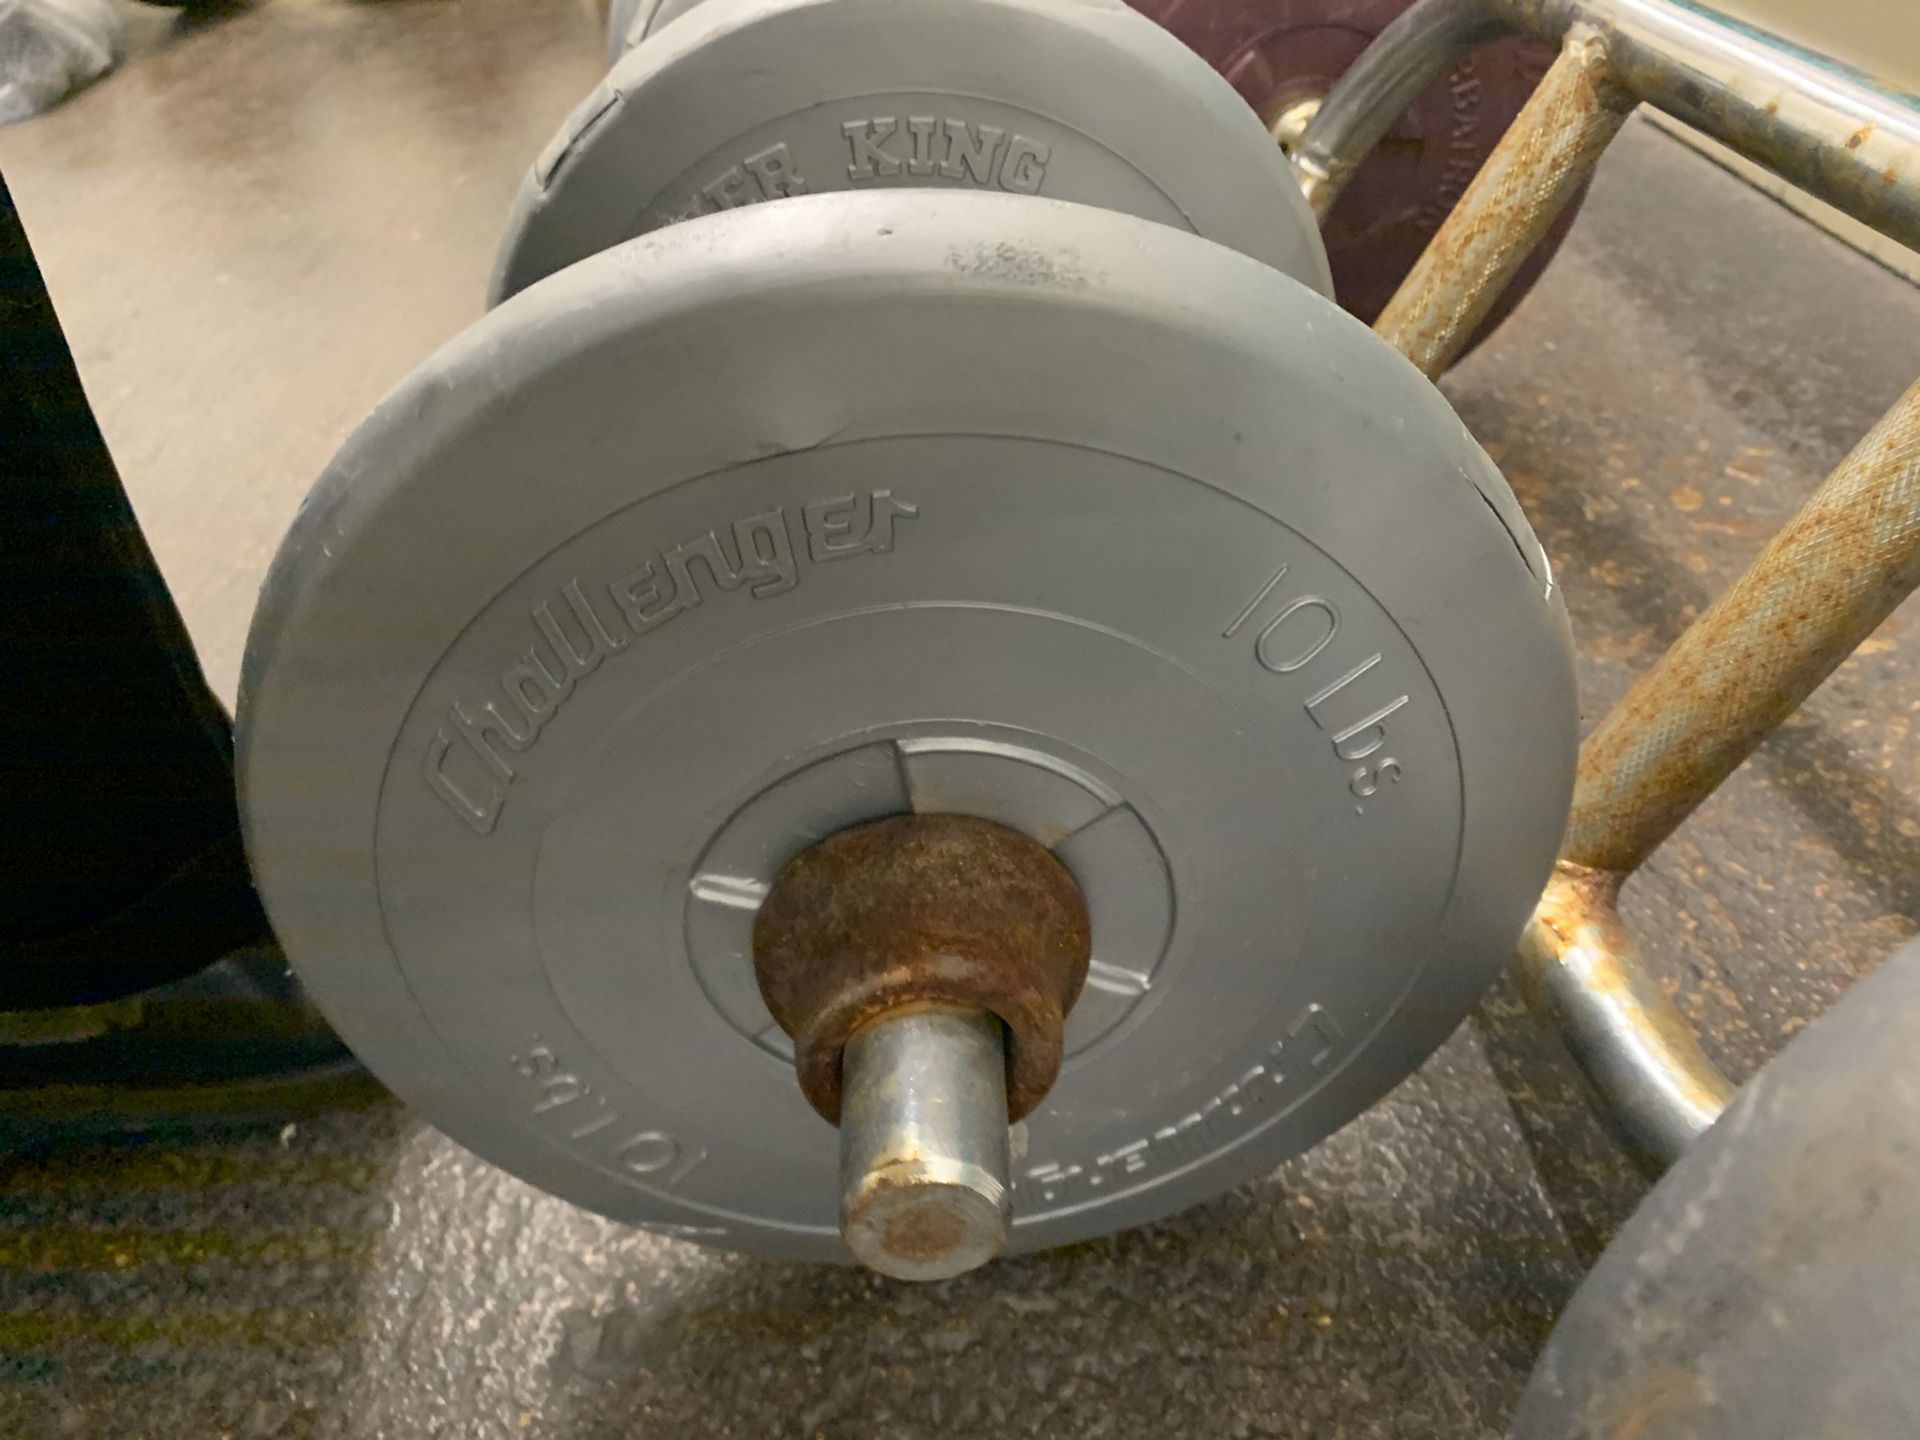 Curl bar and weights included